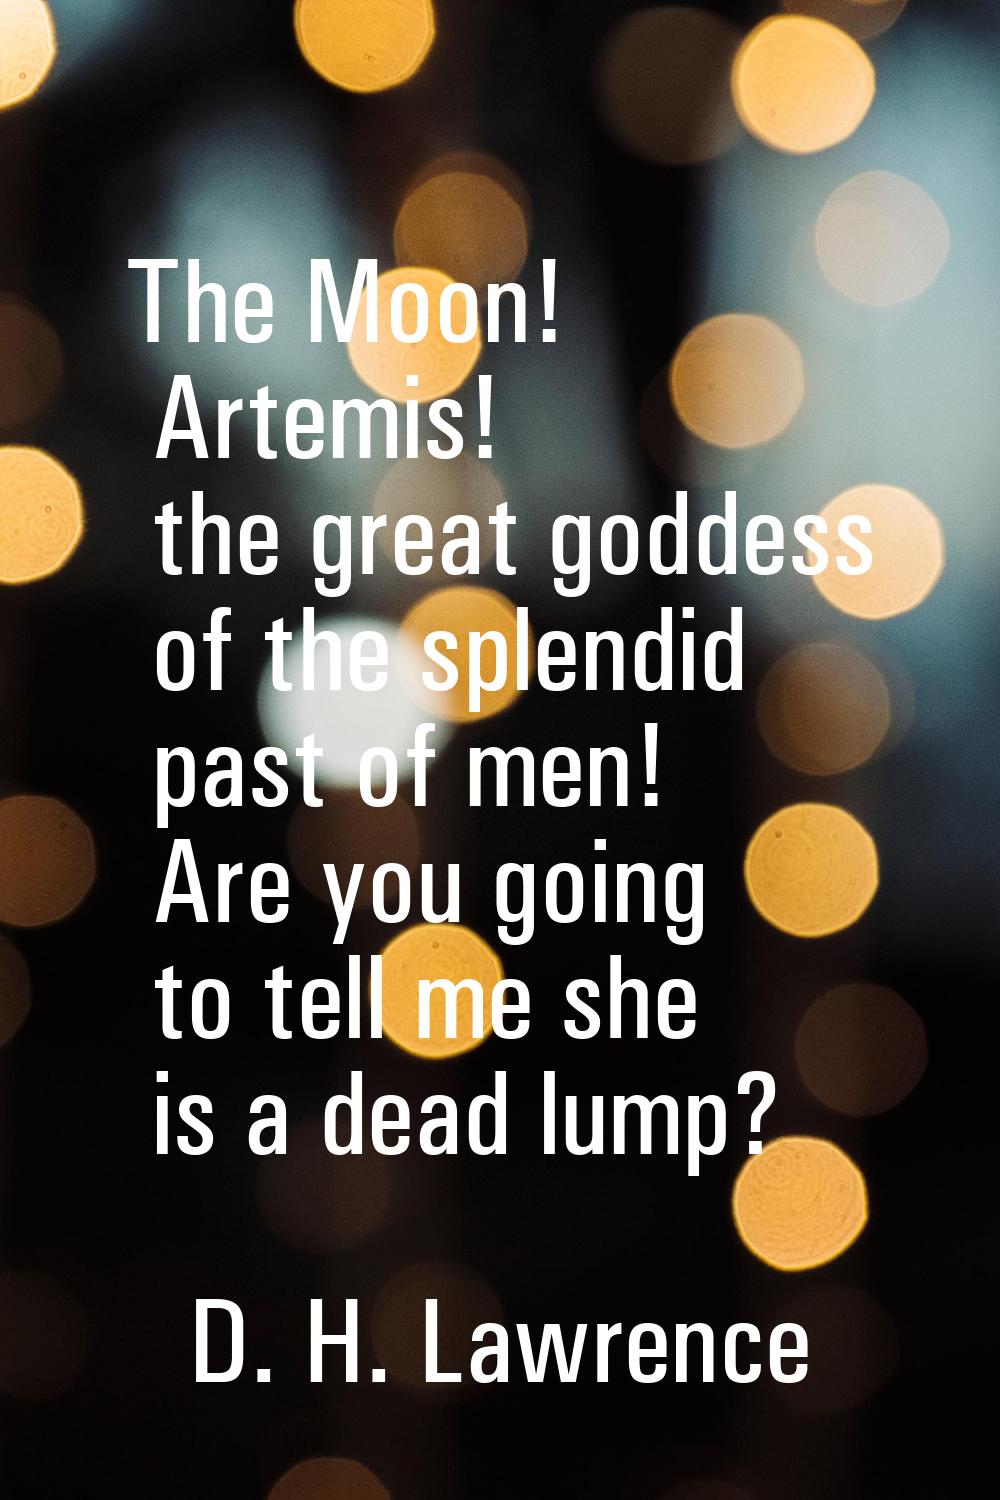 The Moon! Artemis! the great goddess of the splendid past of men! Are you going to tell me she is a